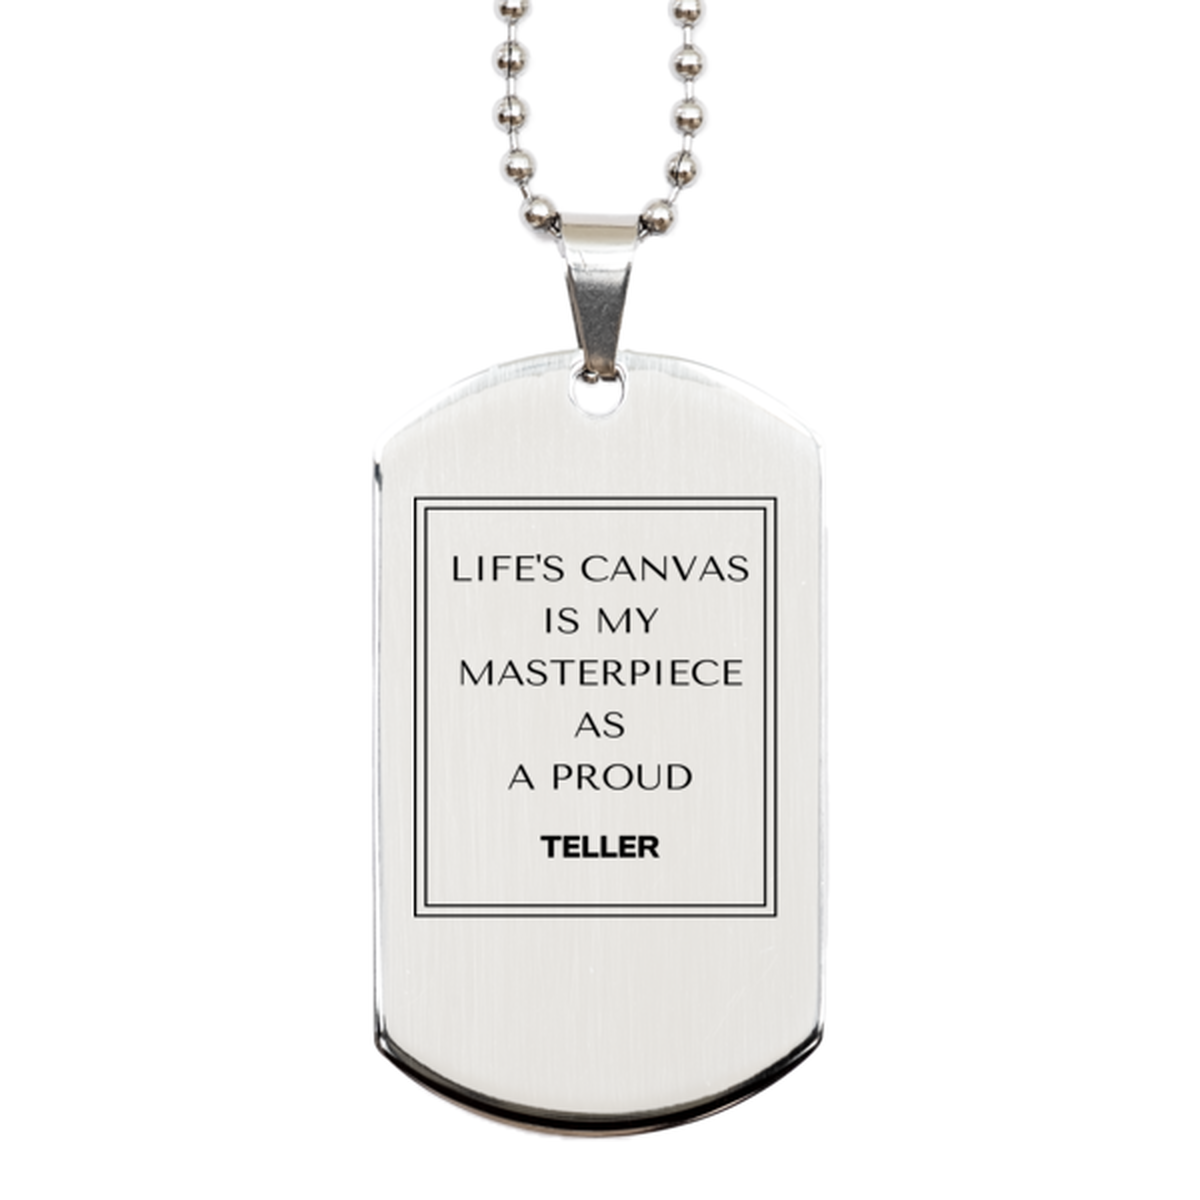 Proud Teller Gifts, Life's canvas is my masterpiece, Epic Birthday Christmas Unique Silver Dog Tag For Teller, Coworkers, Men, Women, Friends